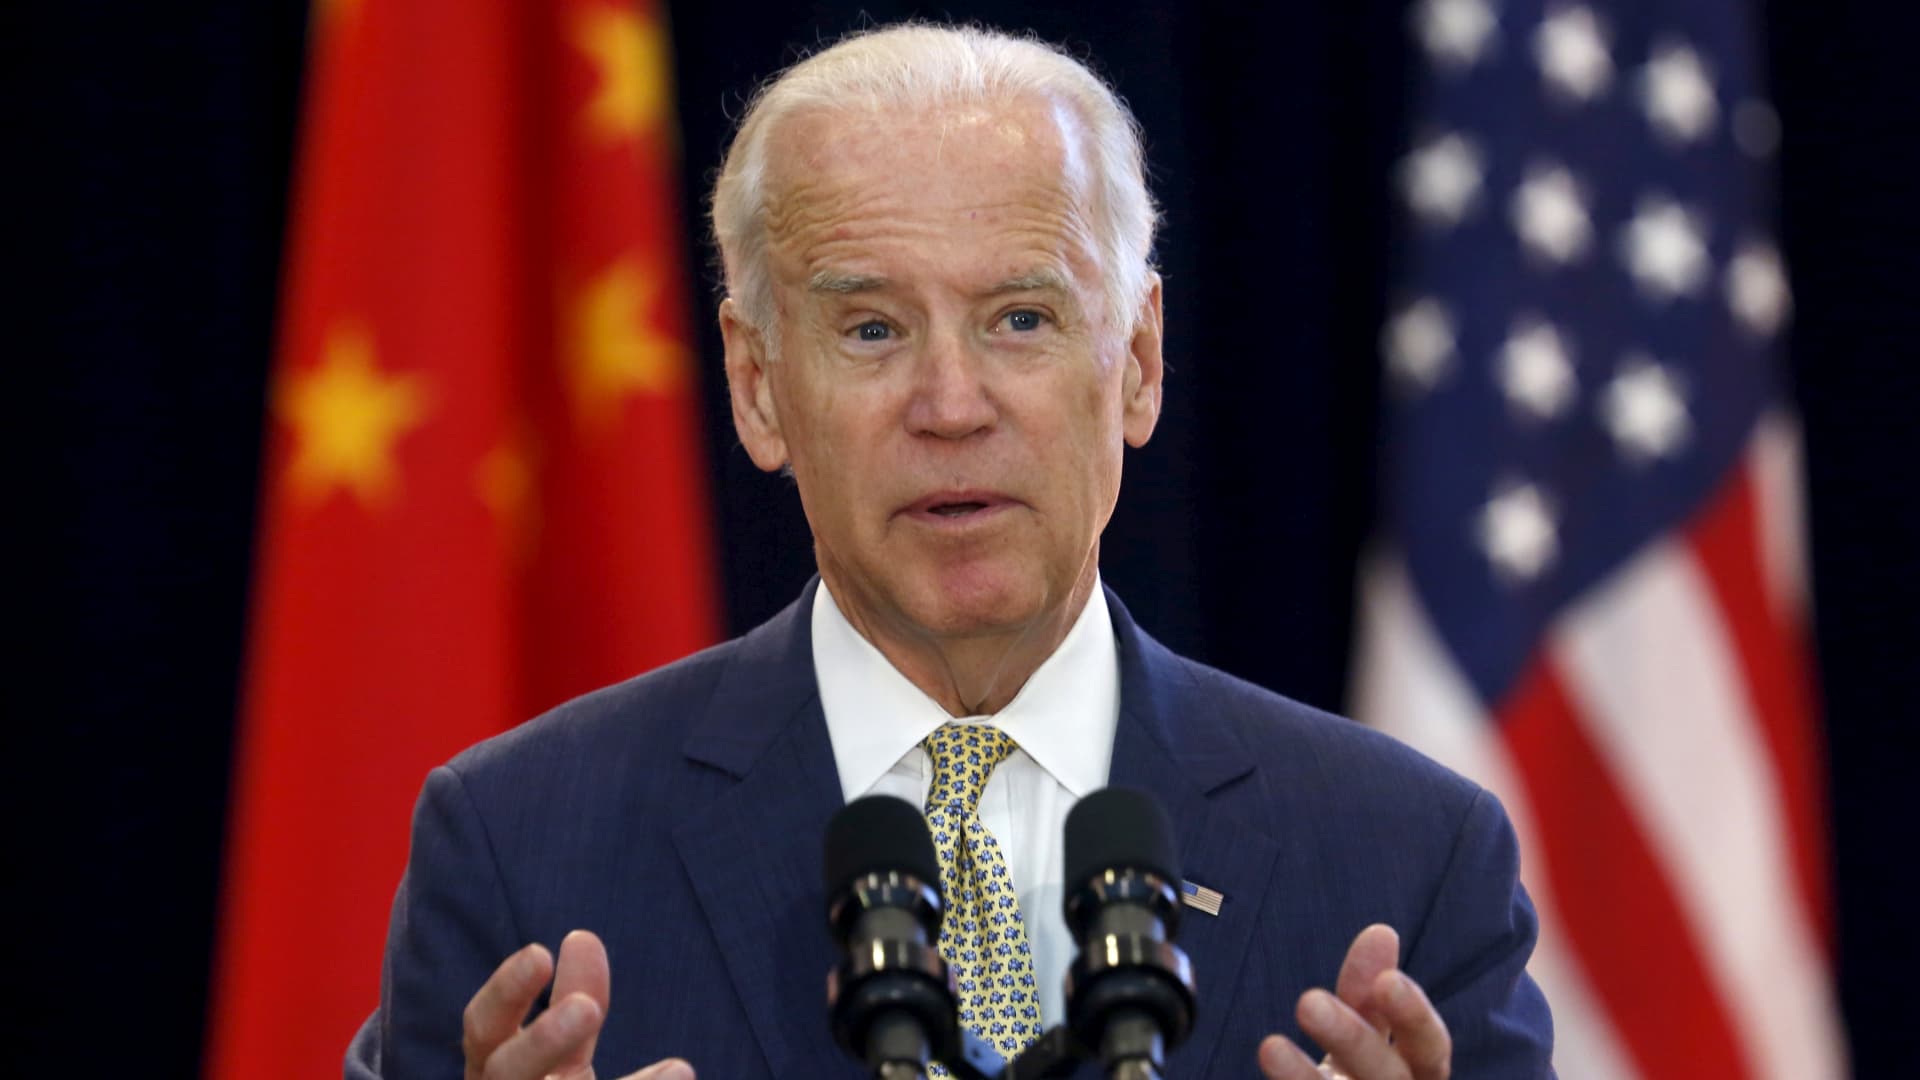 Biden is ‘paying lip service’ to the U.S. position on Taiwan, former Chinese army officer says